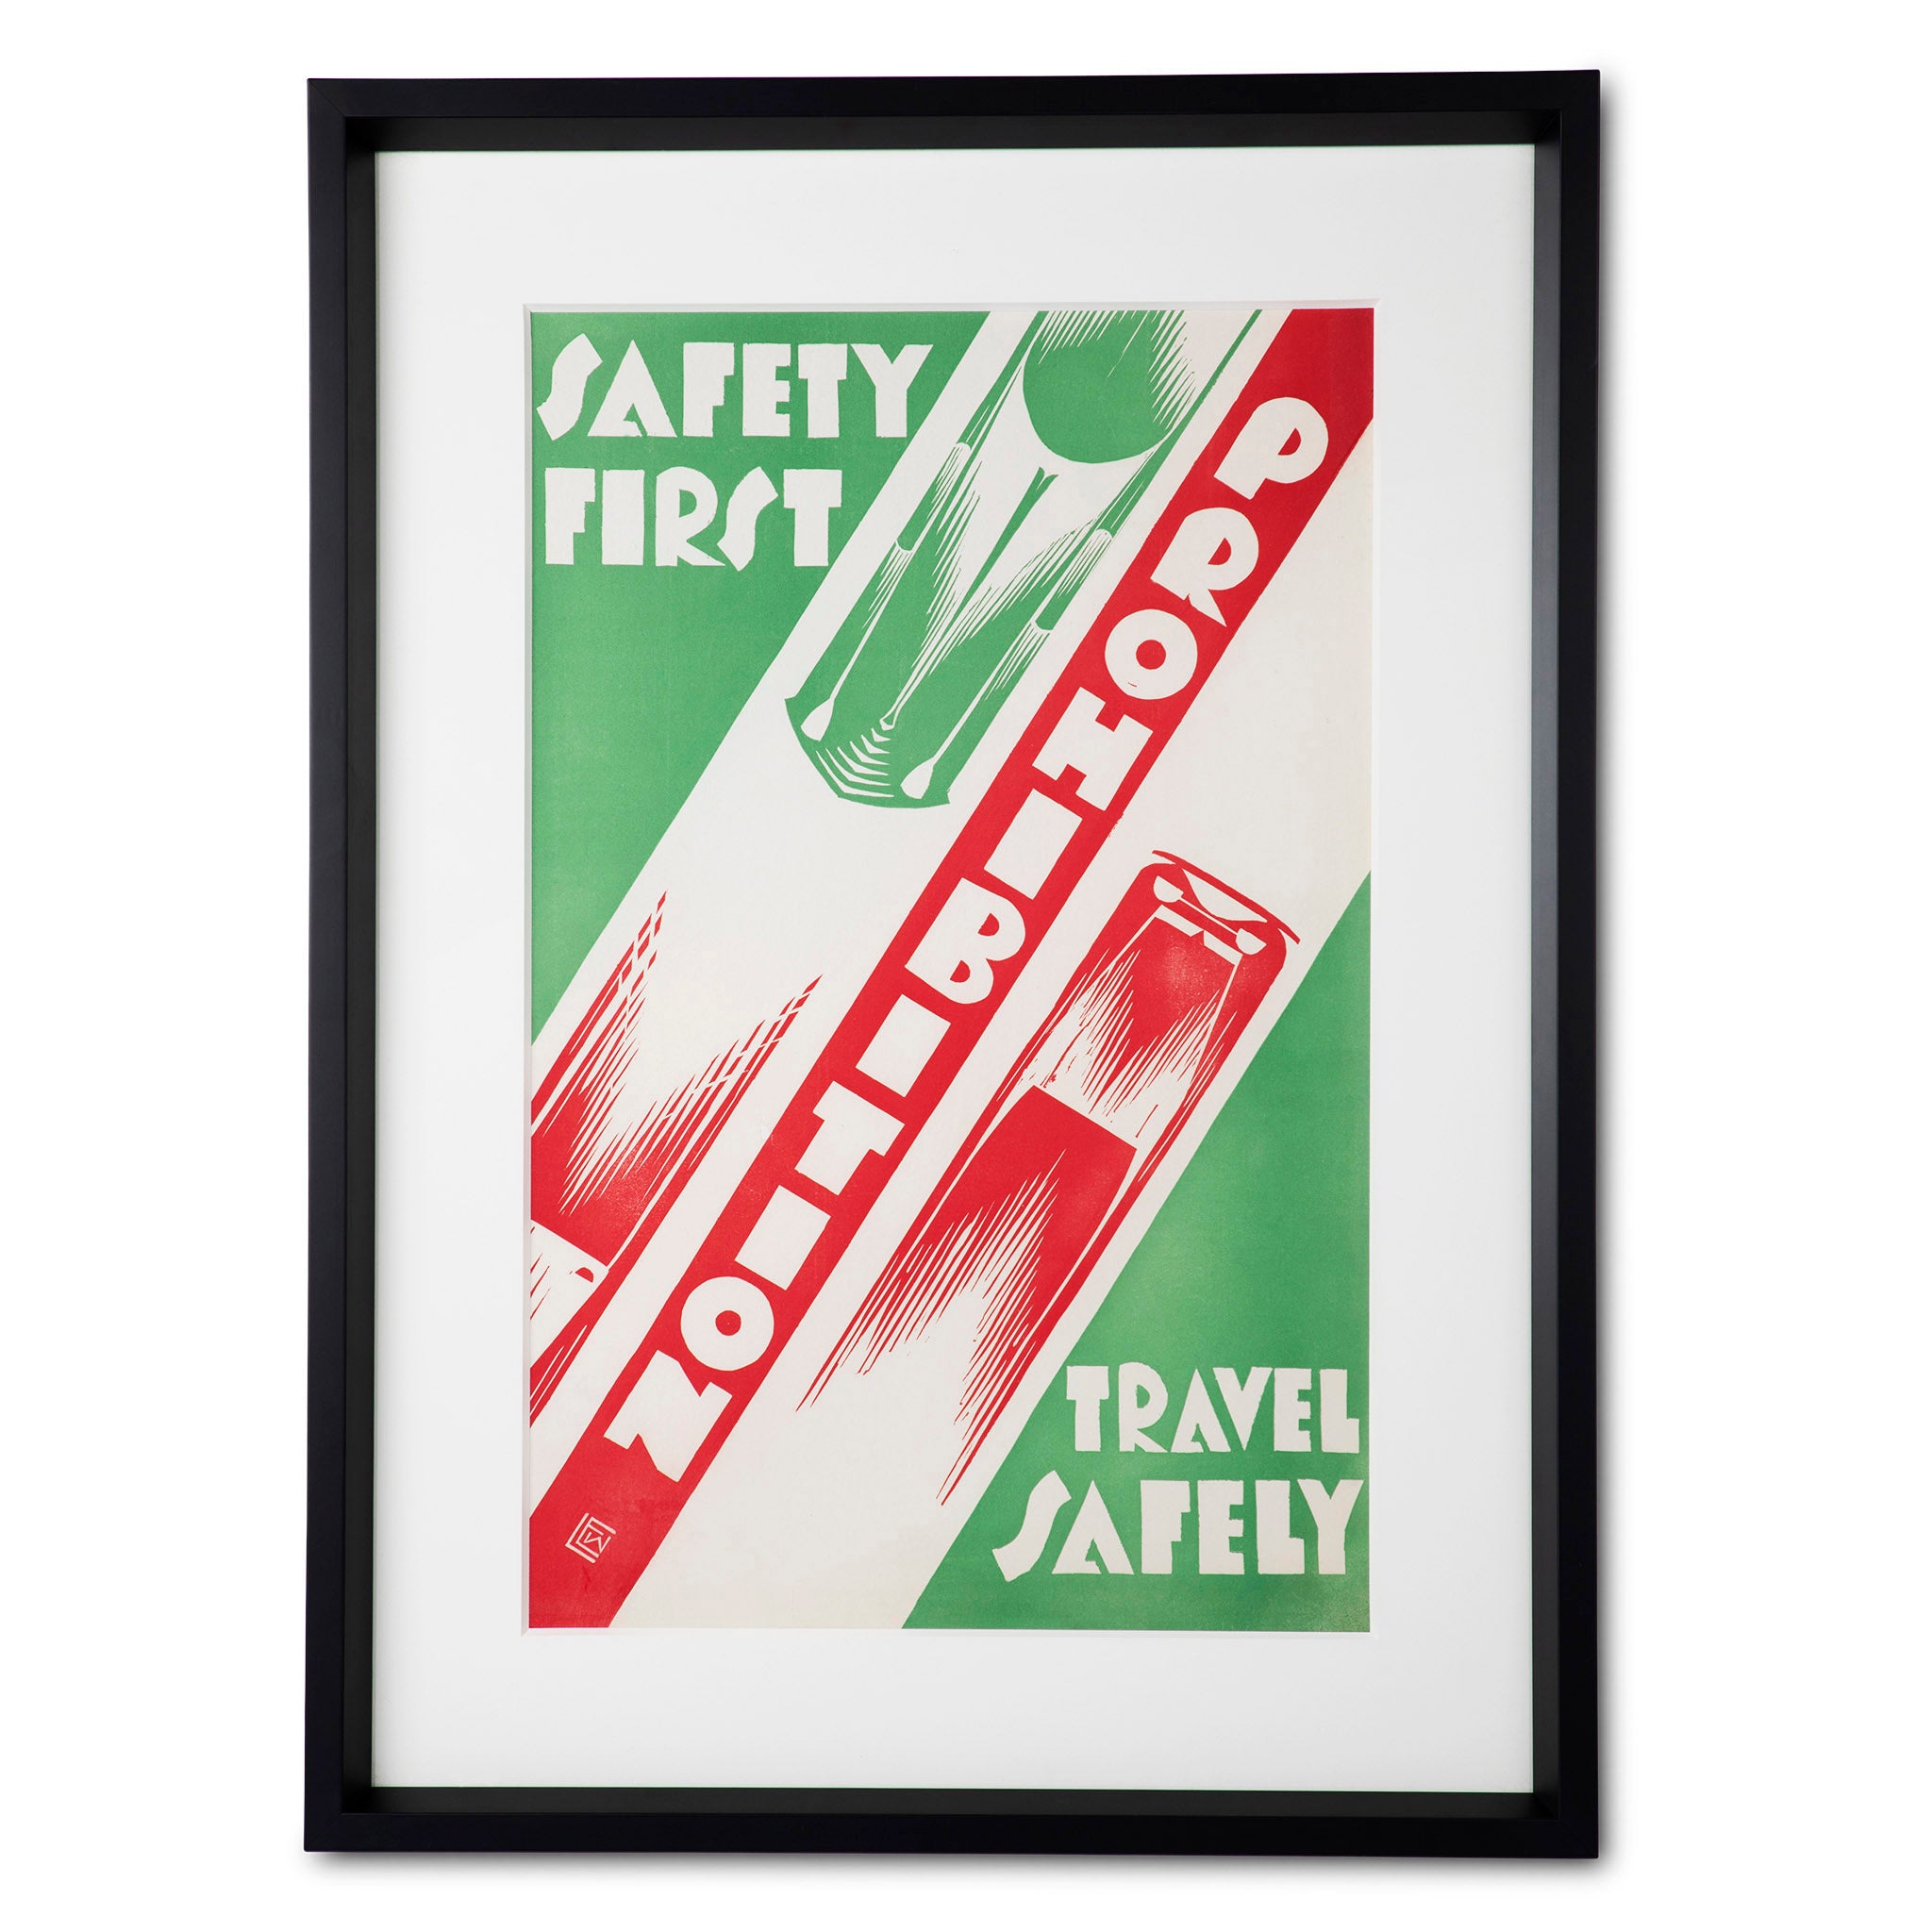 Prohibition Safety First Original Poster | Poster